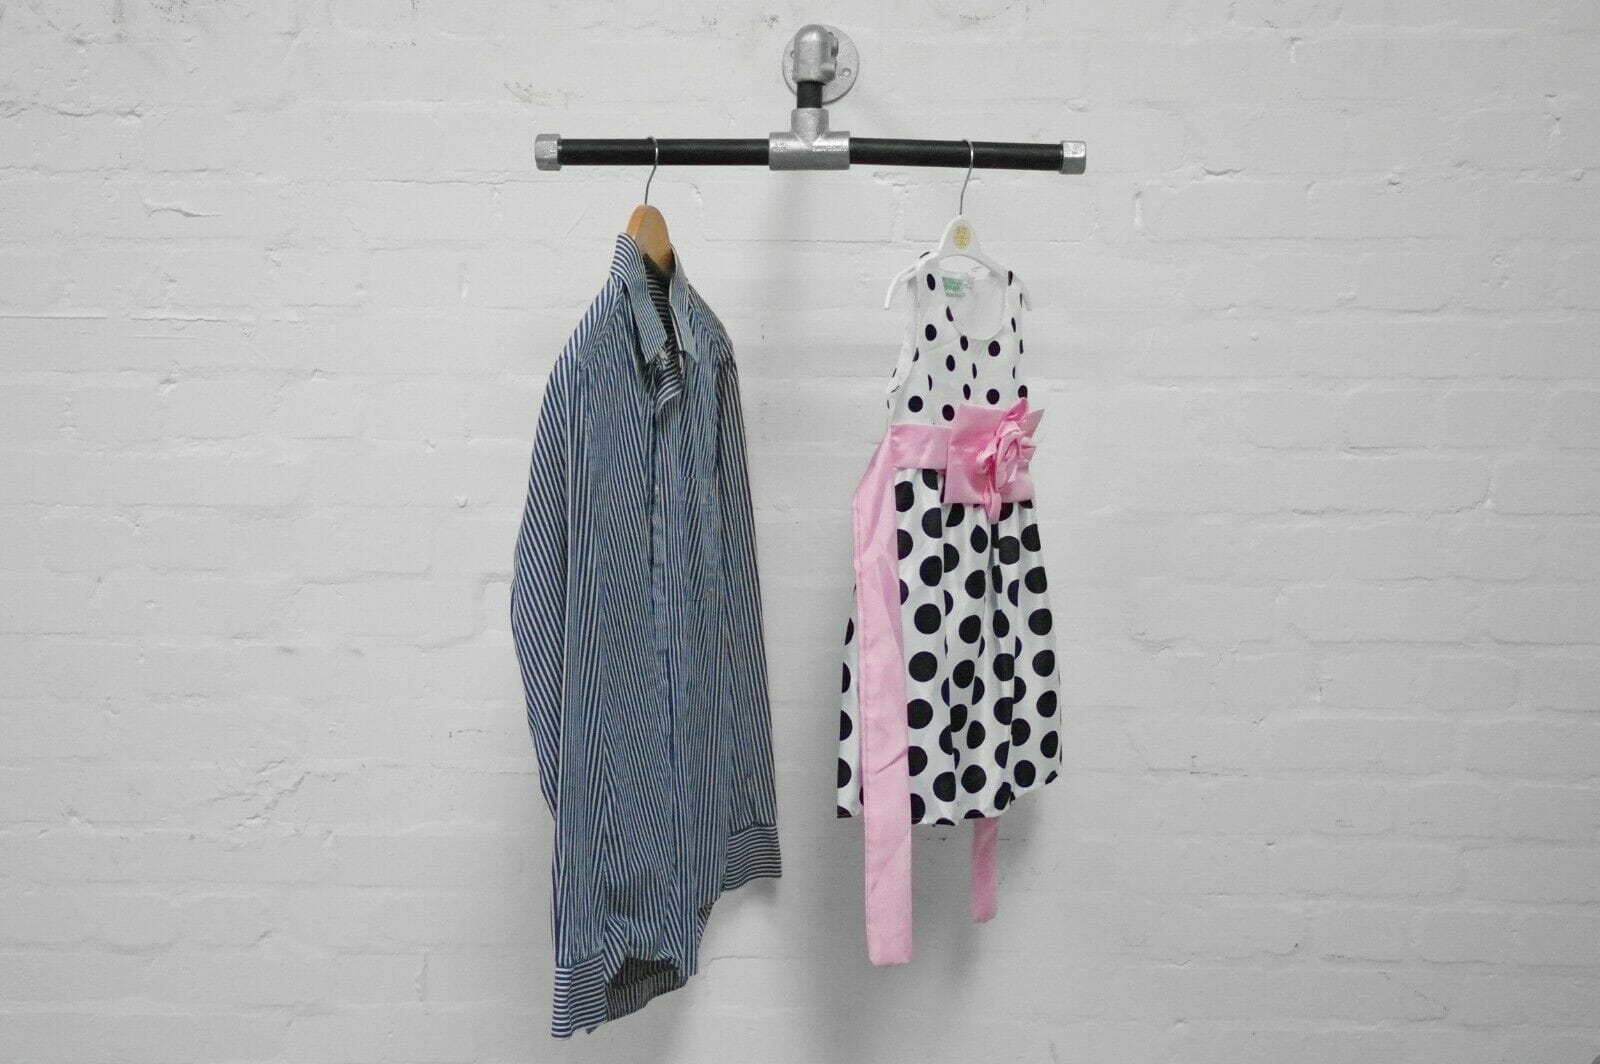 tee shape wall mounted industrial steel pipe clothes rail